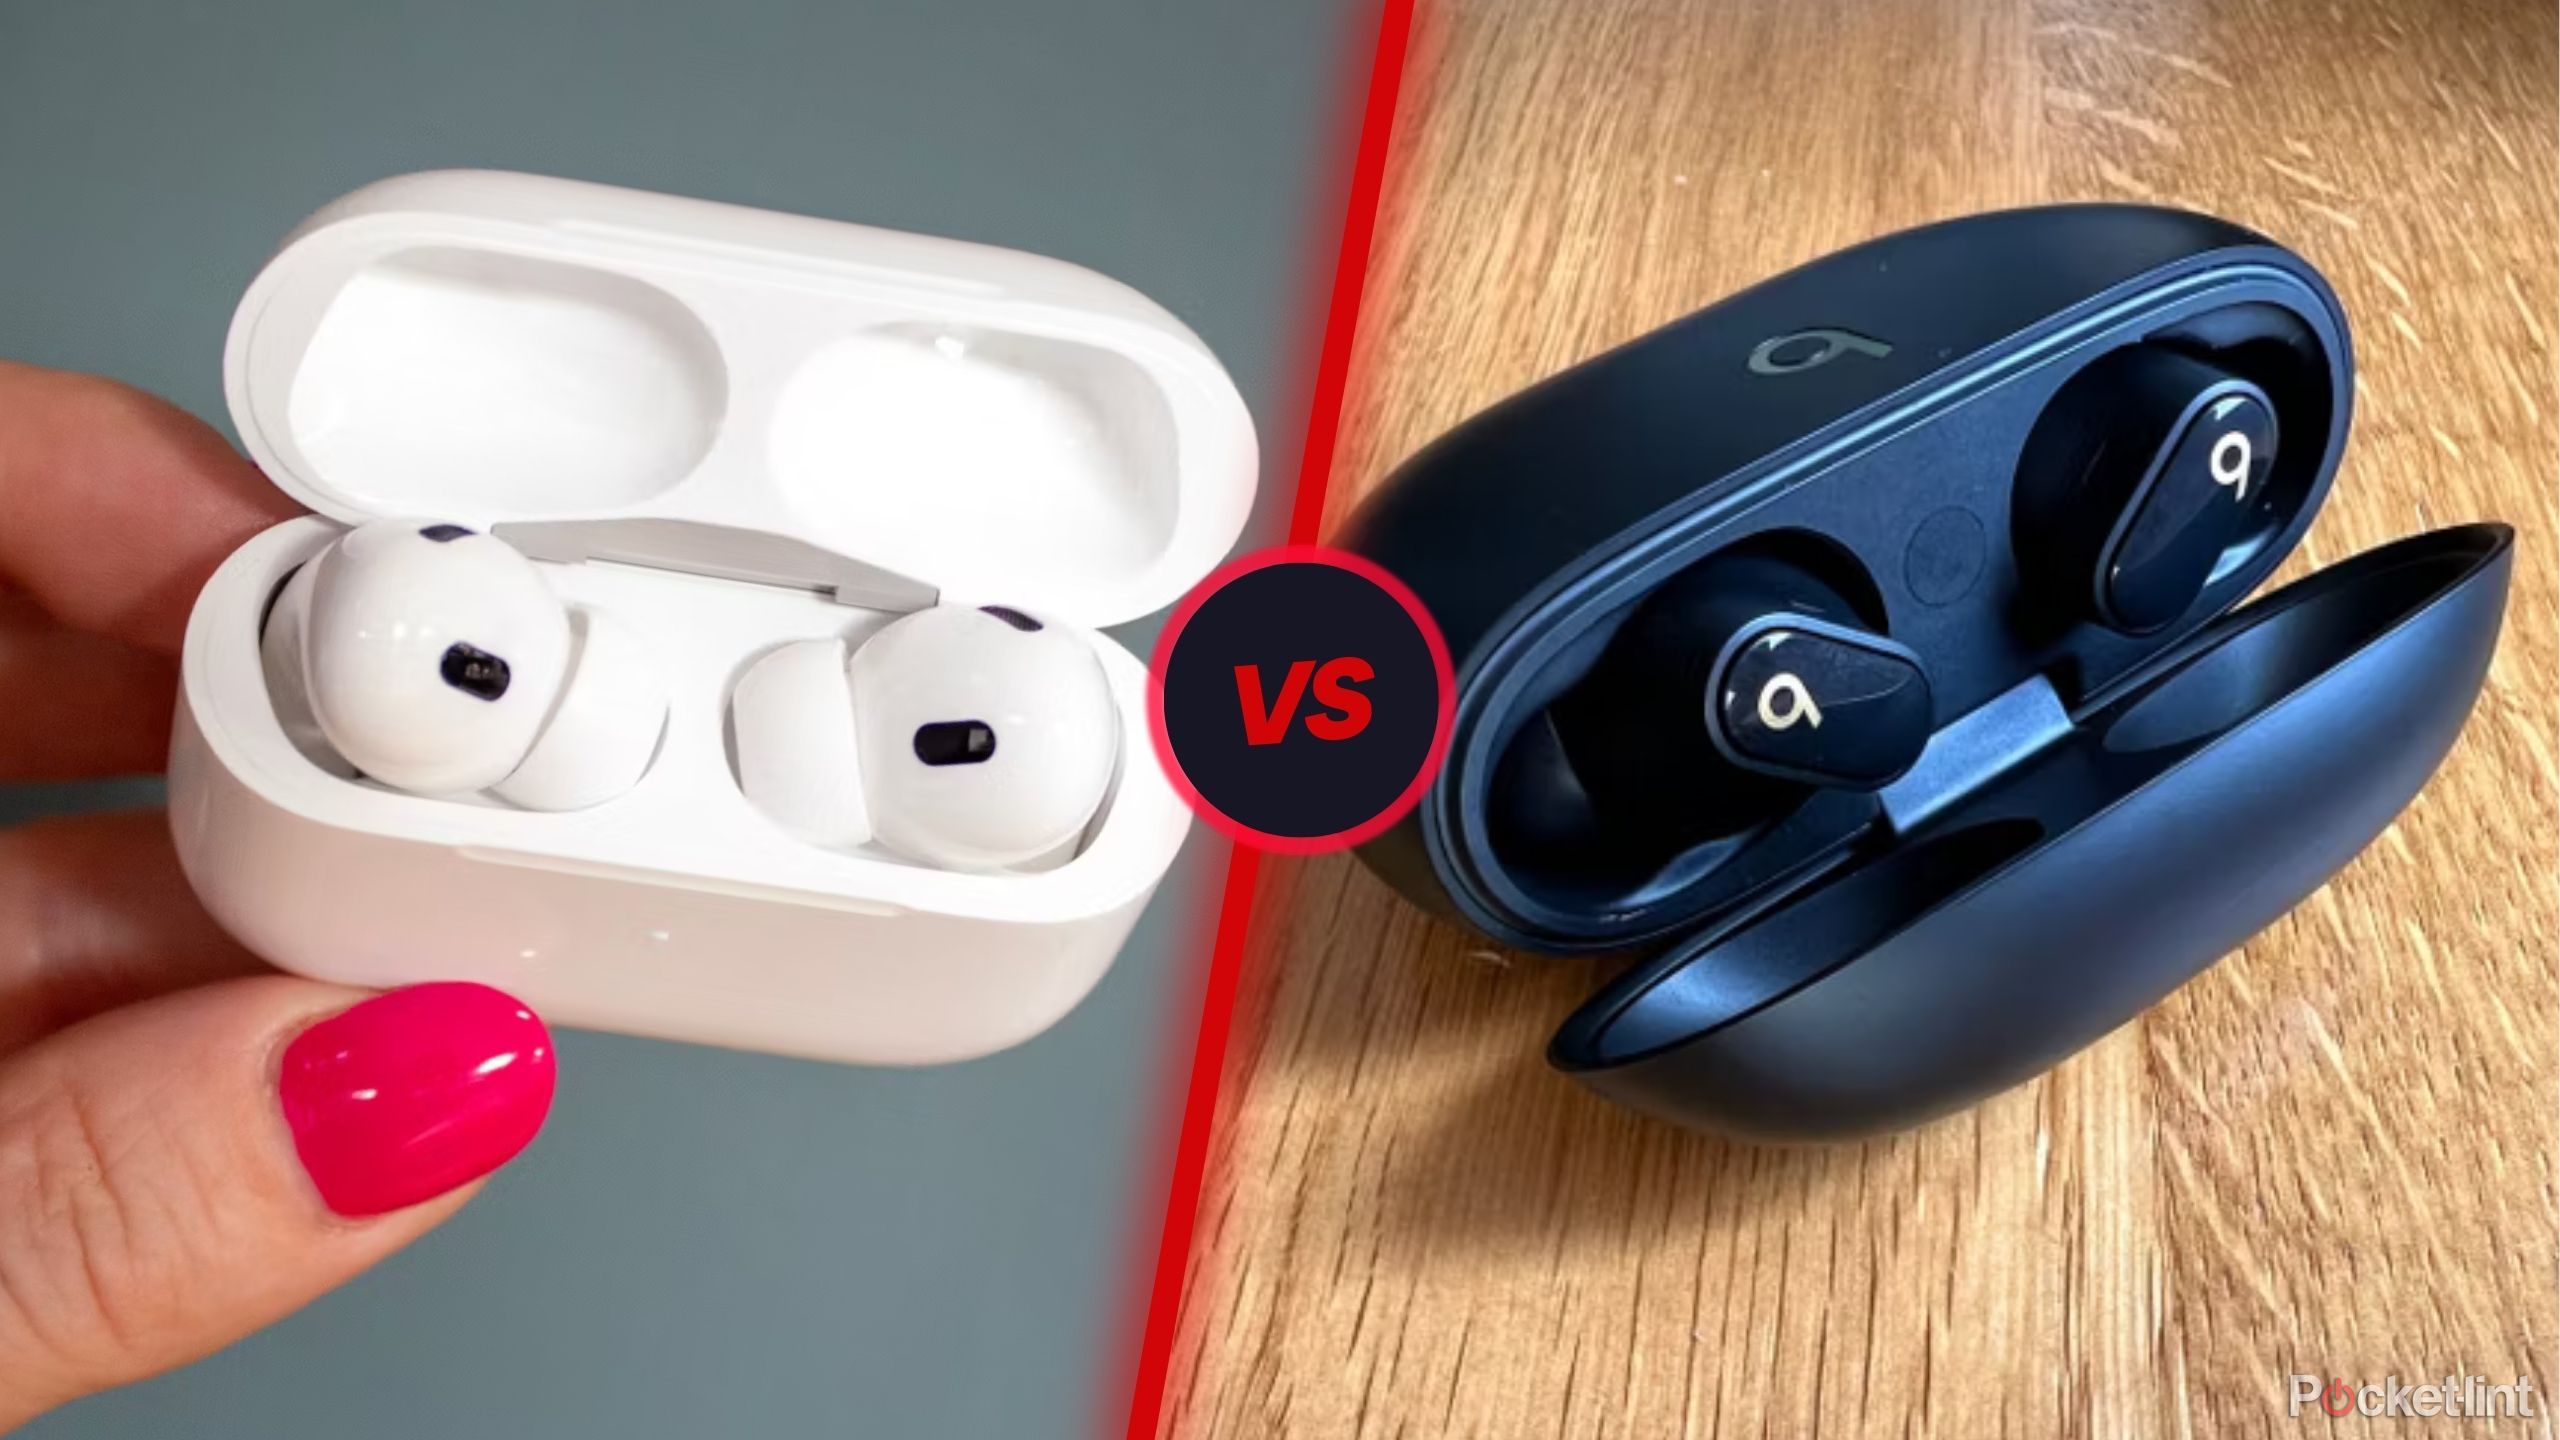 Beats Studio Buds+ photo next to red slash line with VS in middle on other side photo of Apple AirPods Pro 2nd Generation (USB-C)